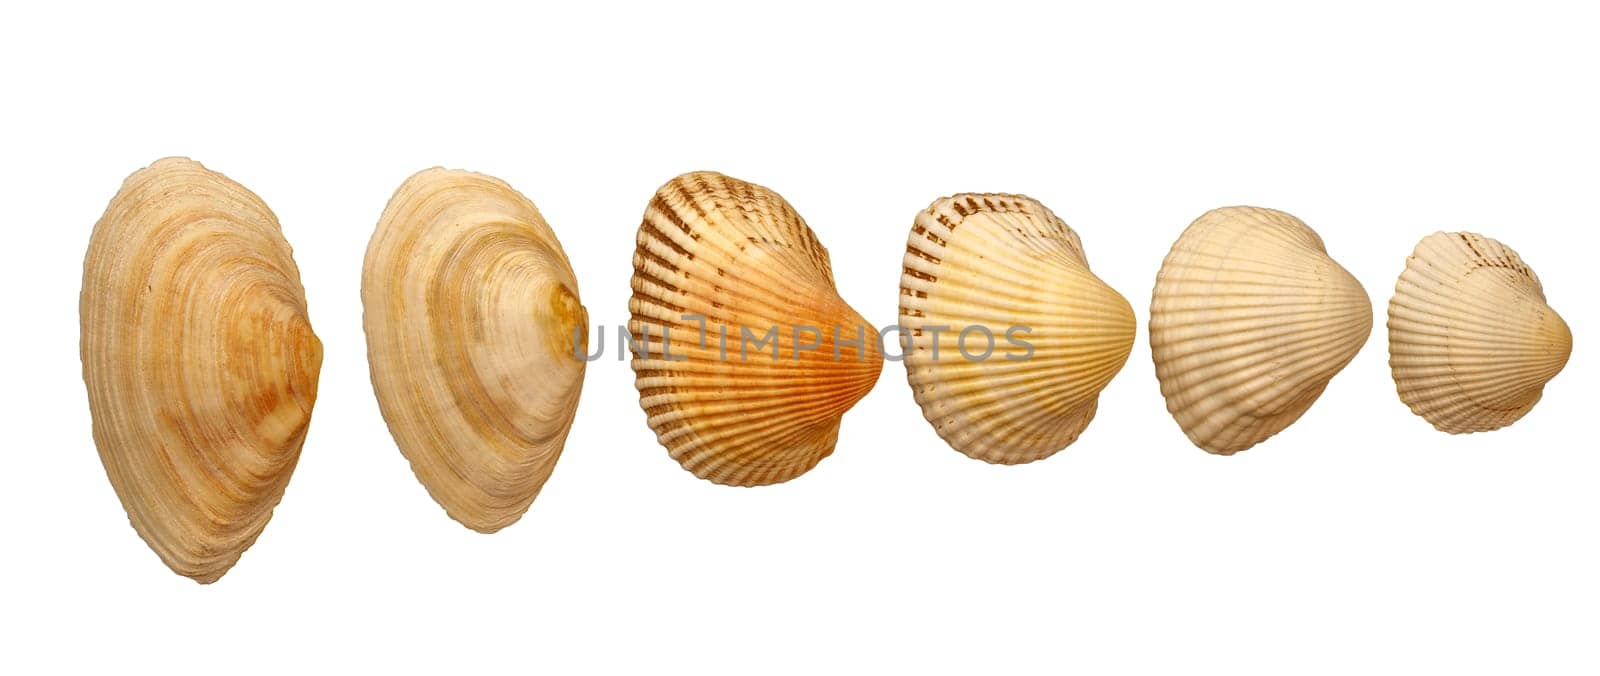 Sea clam shells, isolated on white